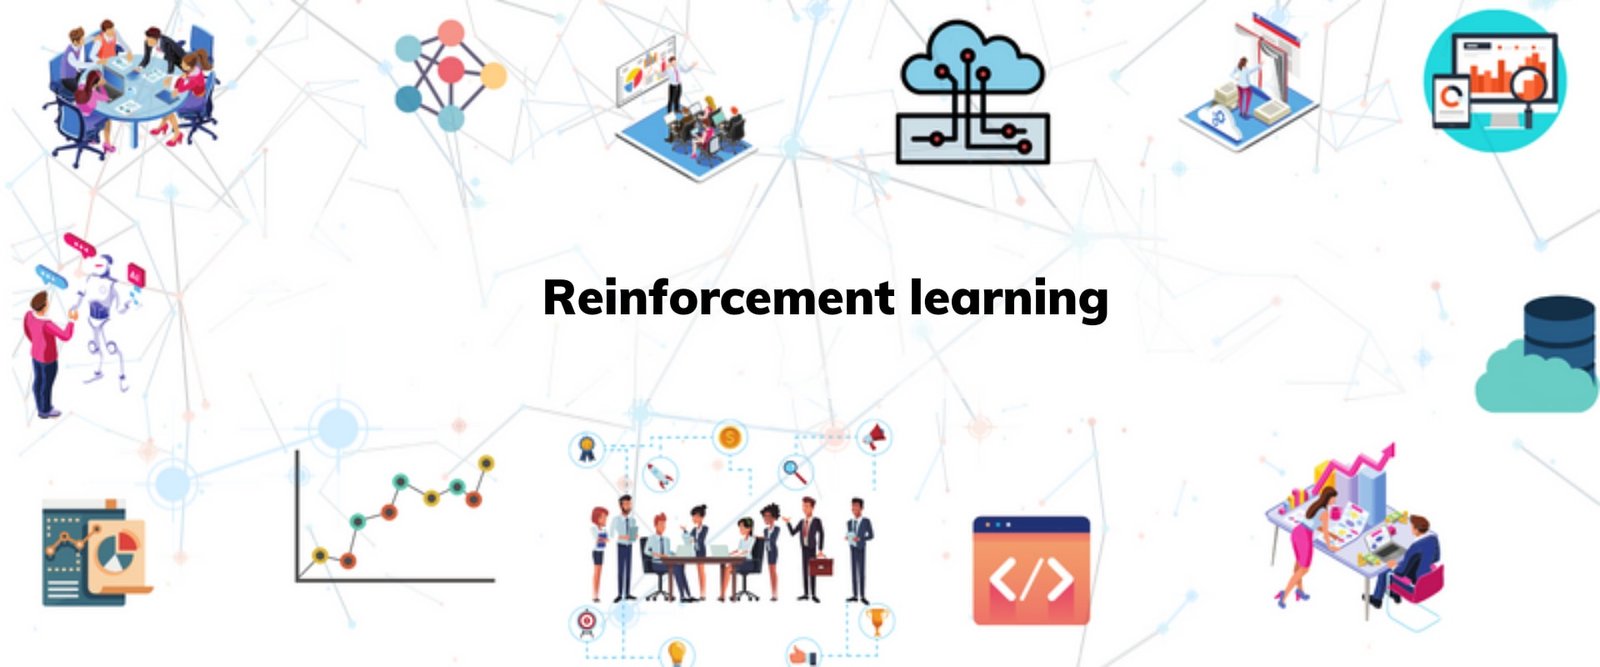 How Reinforcement learning Works? - Pianalytix: Build Real-World Tech ...